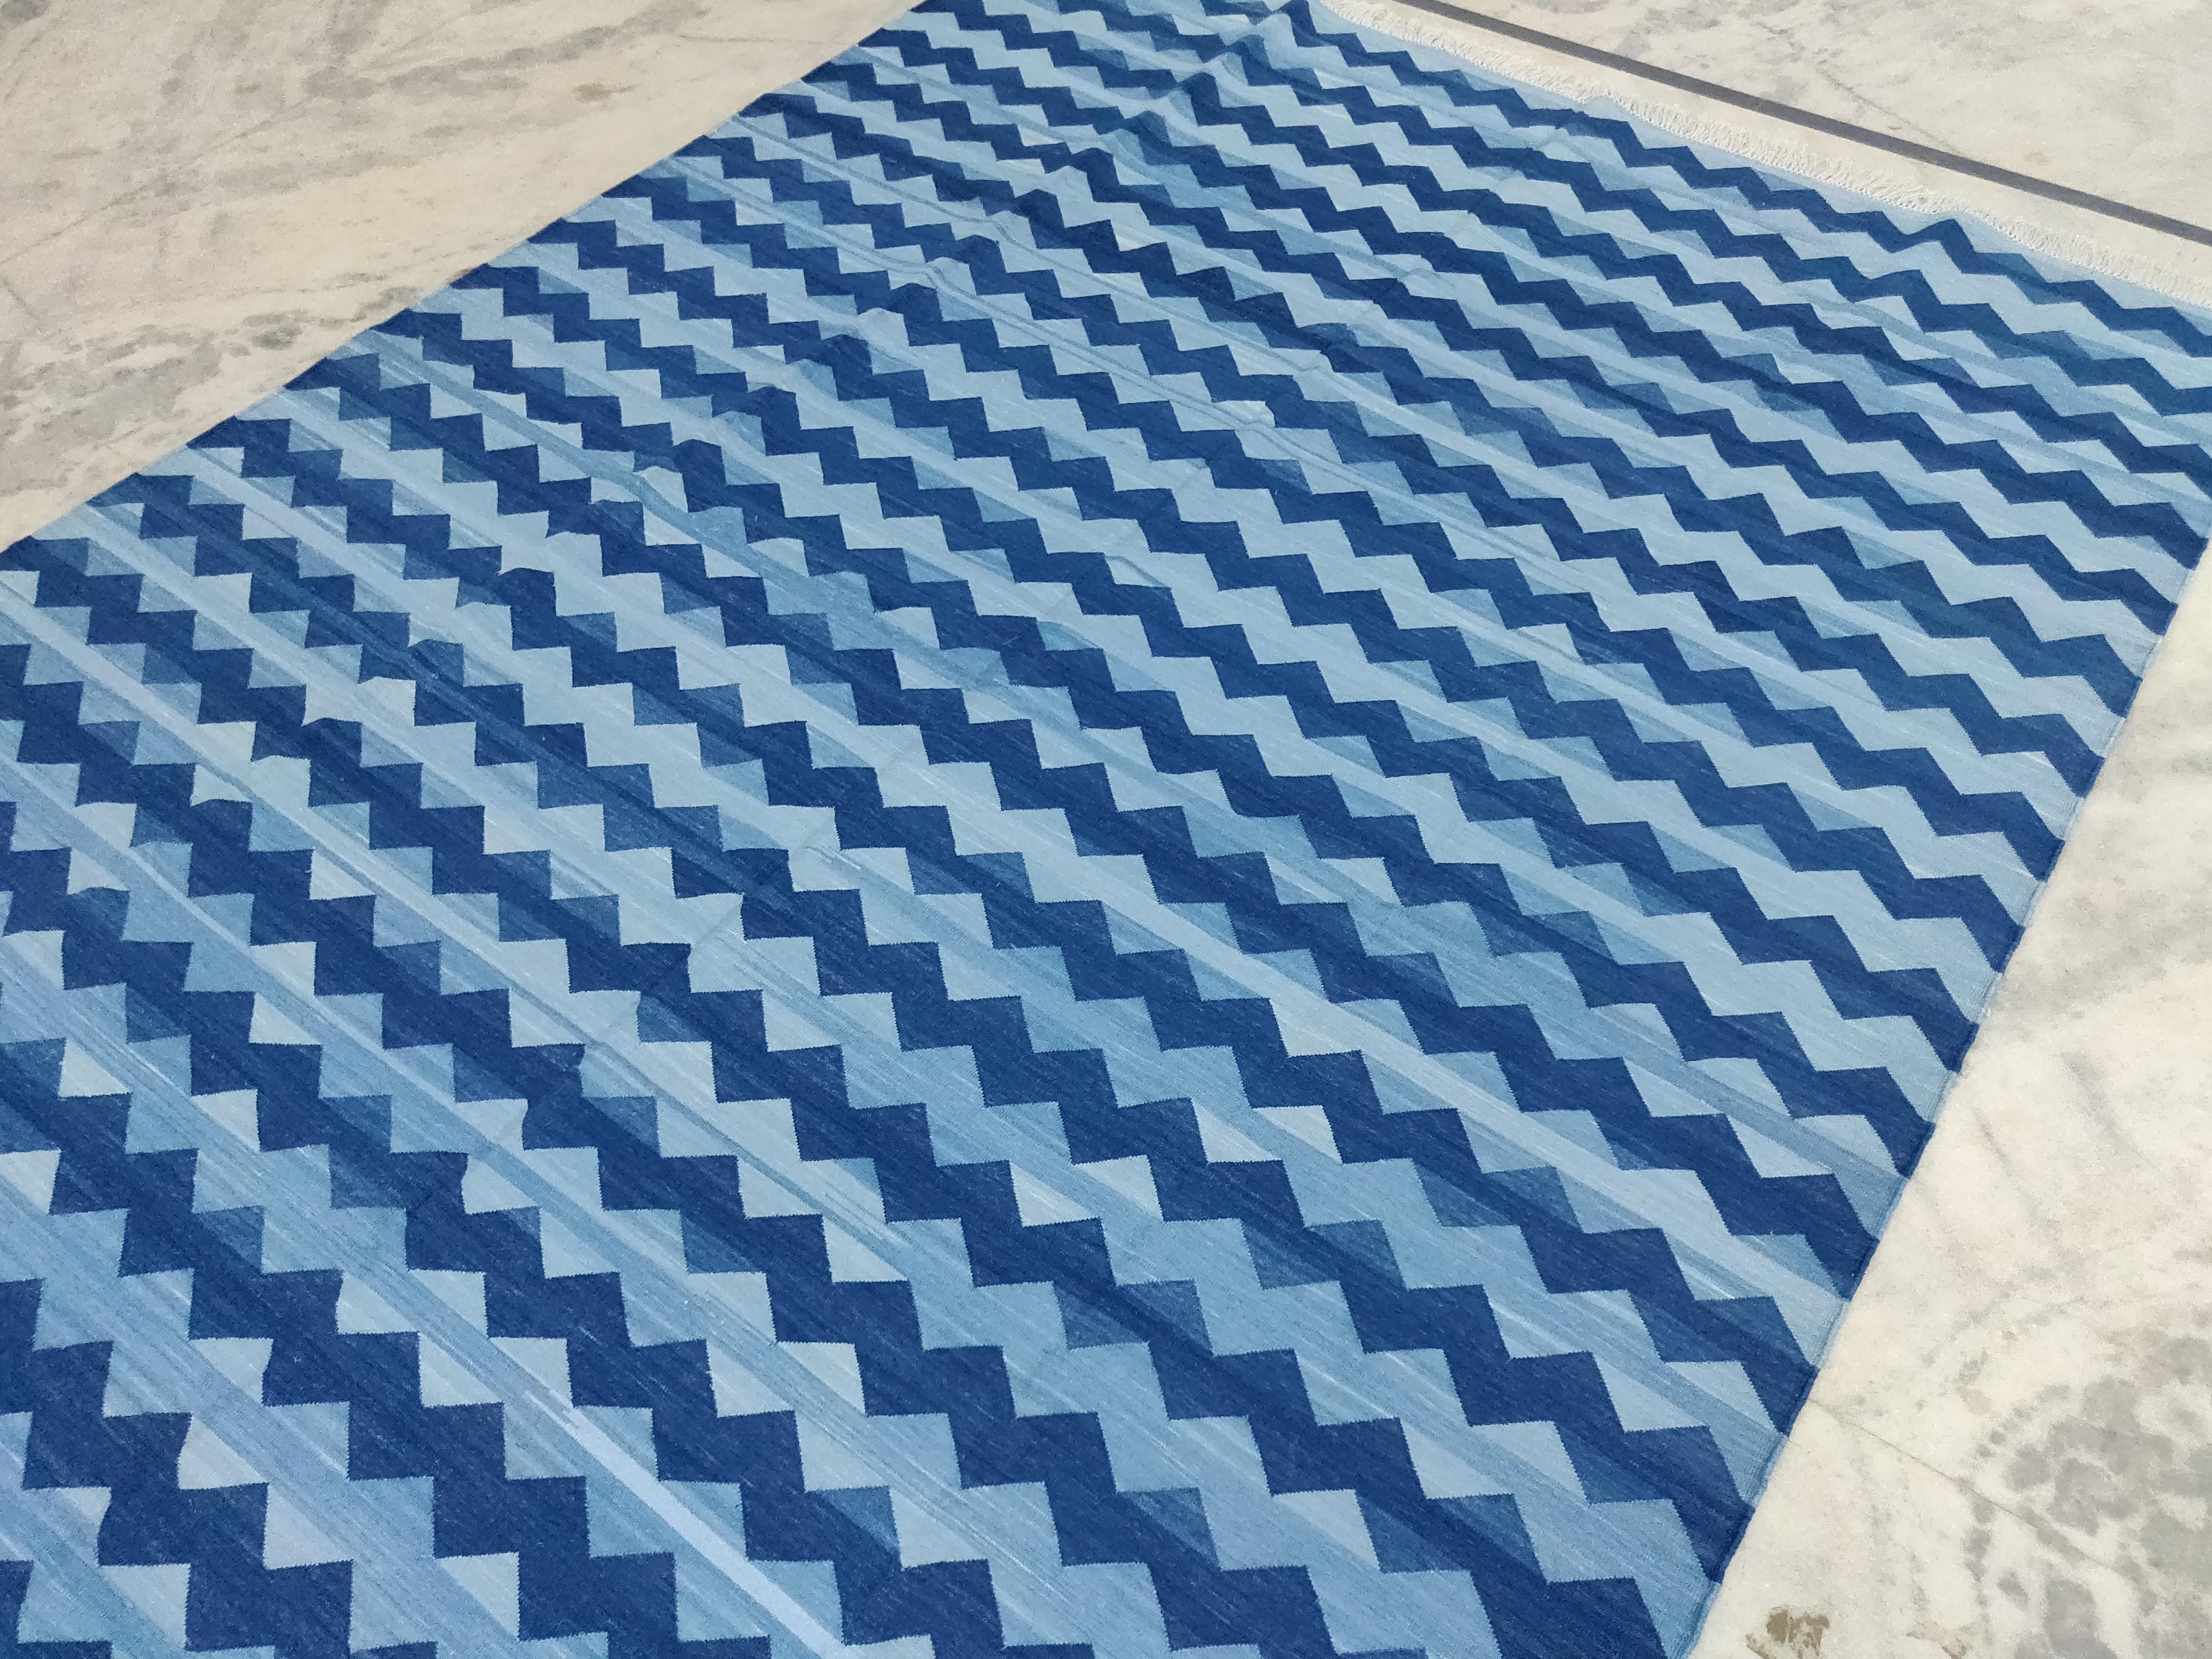 Hand-Woven Handmade Cotton Area Flat Weave Rug, 6x9 Blue Zig Zag Striped Indian Dhurrie Rug For Sale